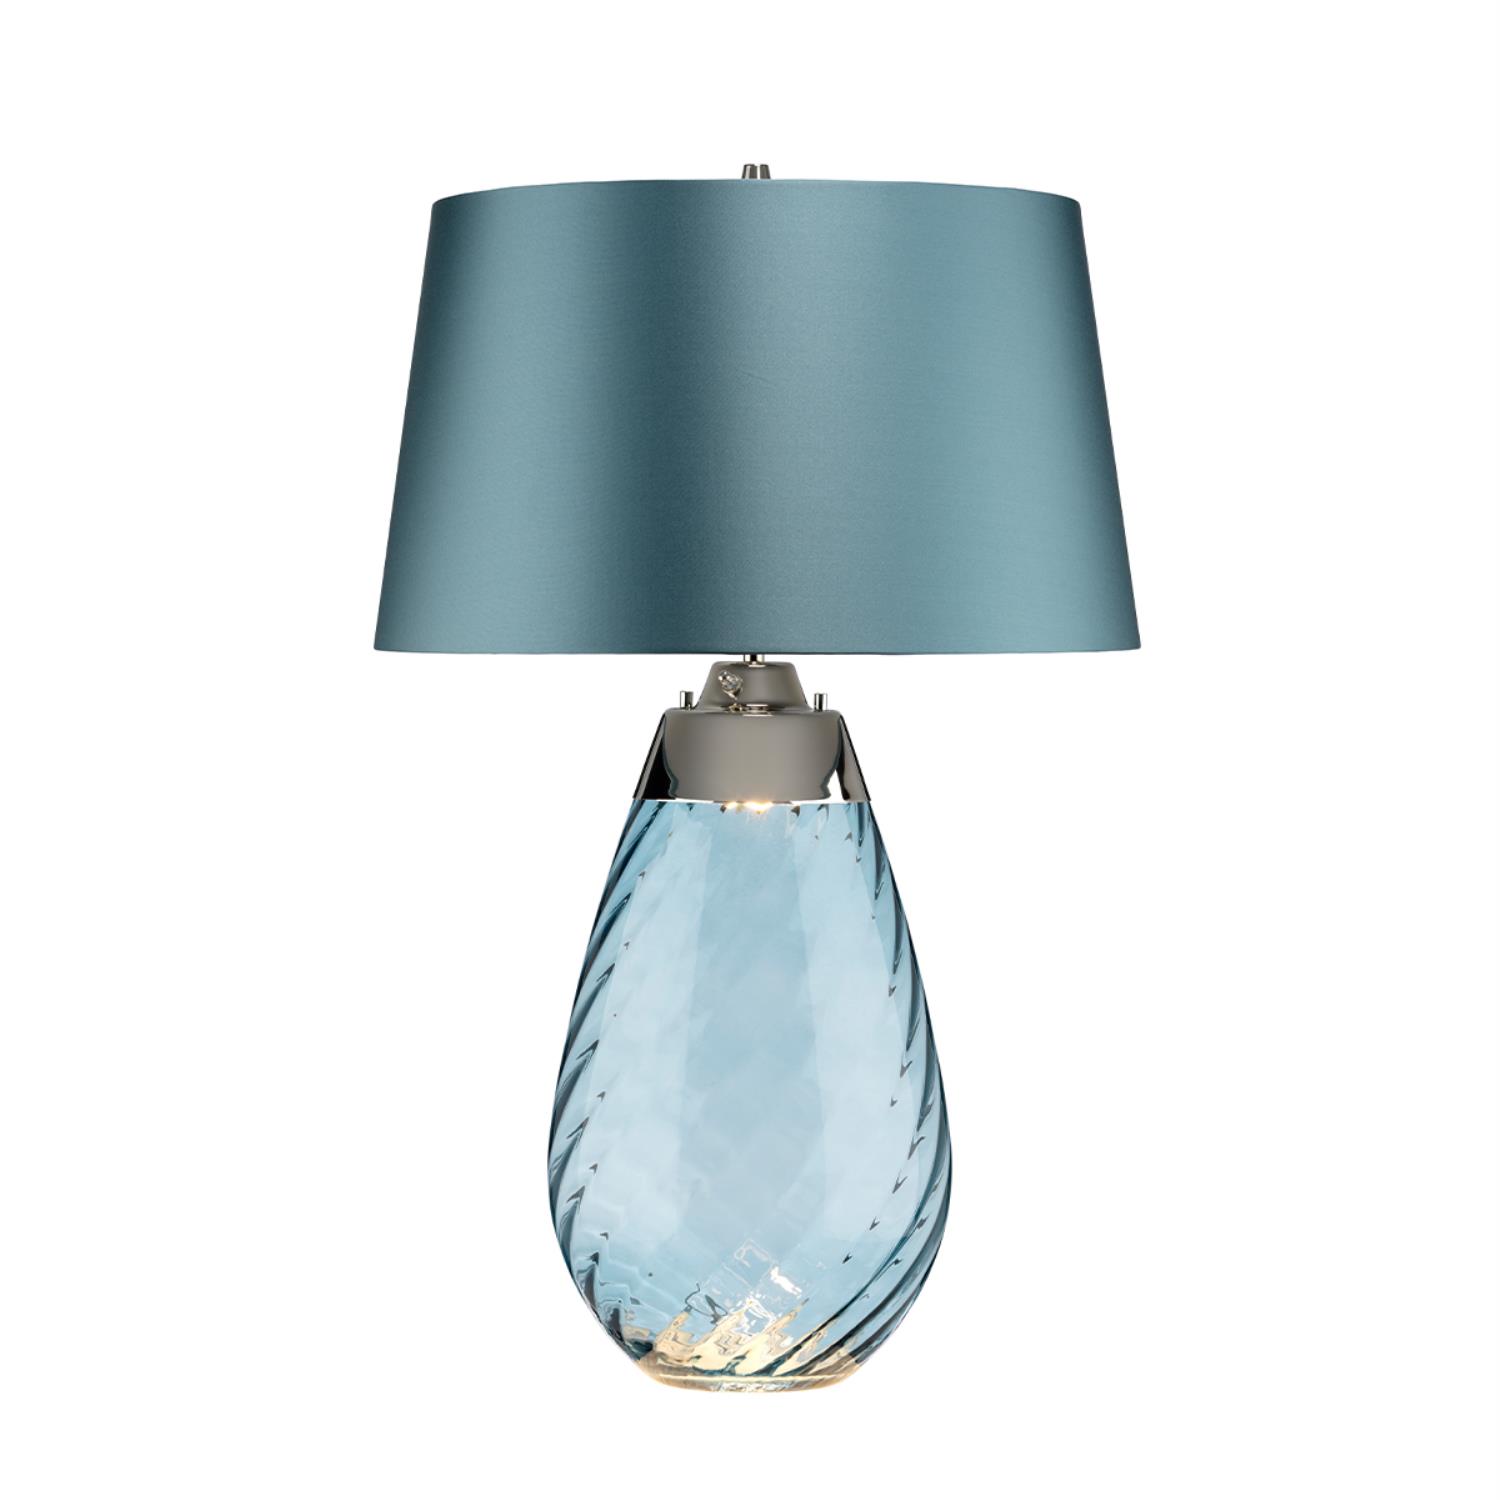 Lucas Mckearn Large Lena Iron And Glass Table Lamp With Blue Finish  TLG3025L